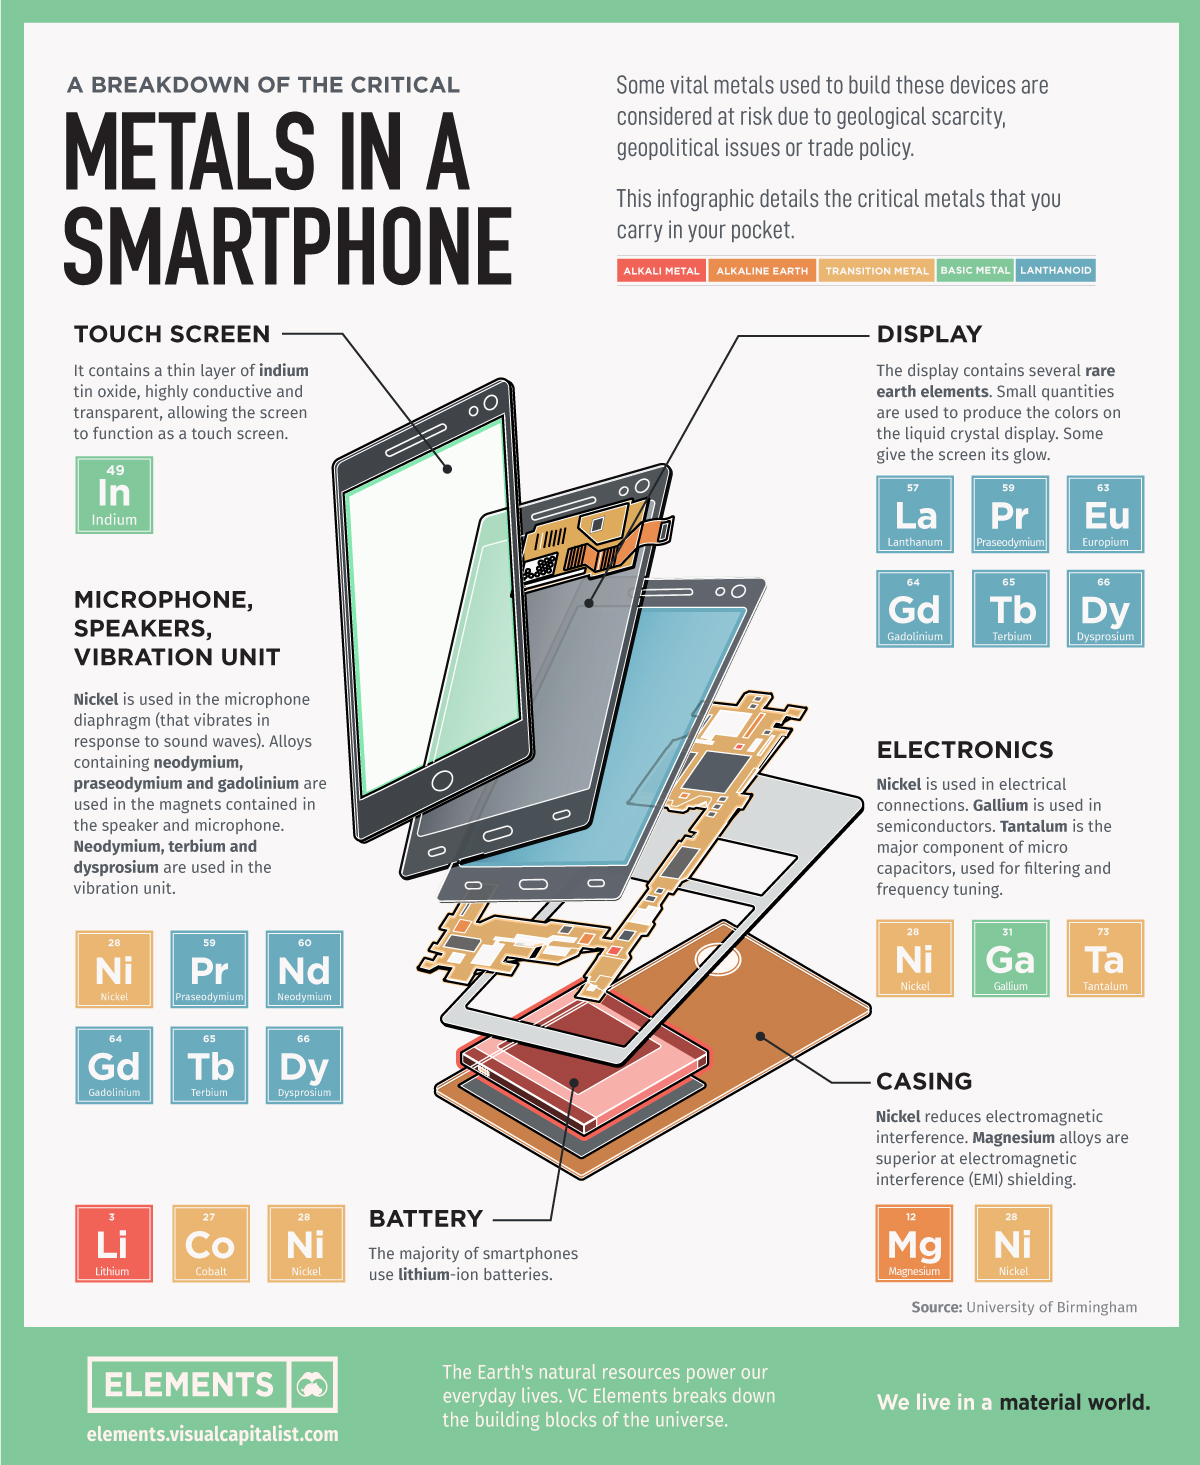 A Breakdown of the Critical Metals in a Smartphone